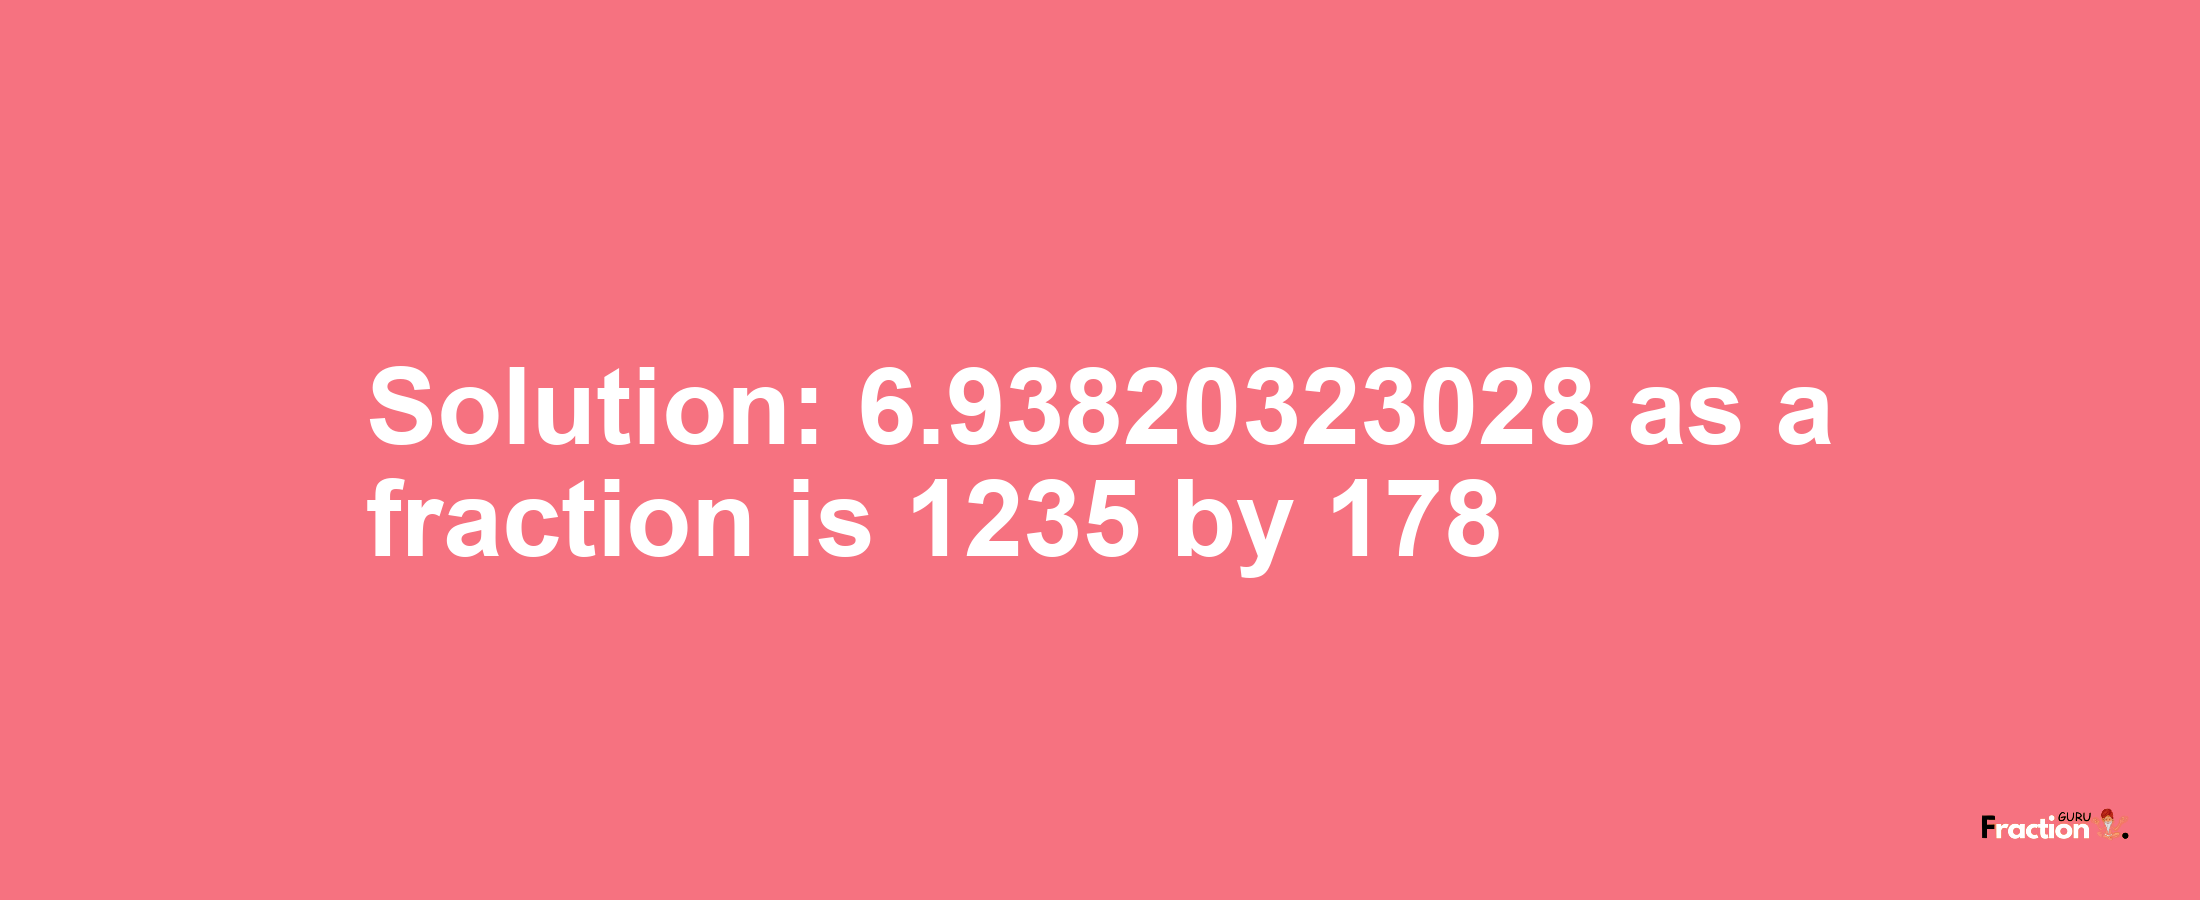 Solution:6.93820323028 as a fraction is 1235/178